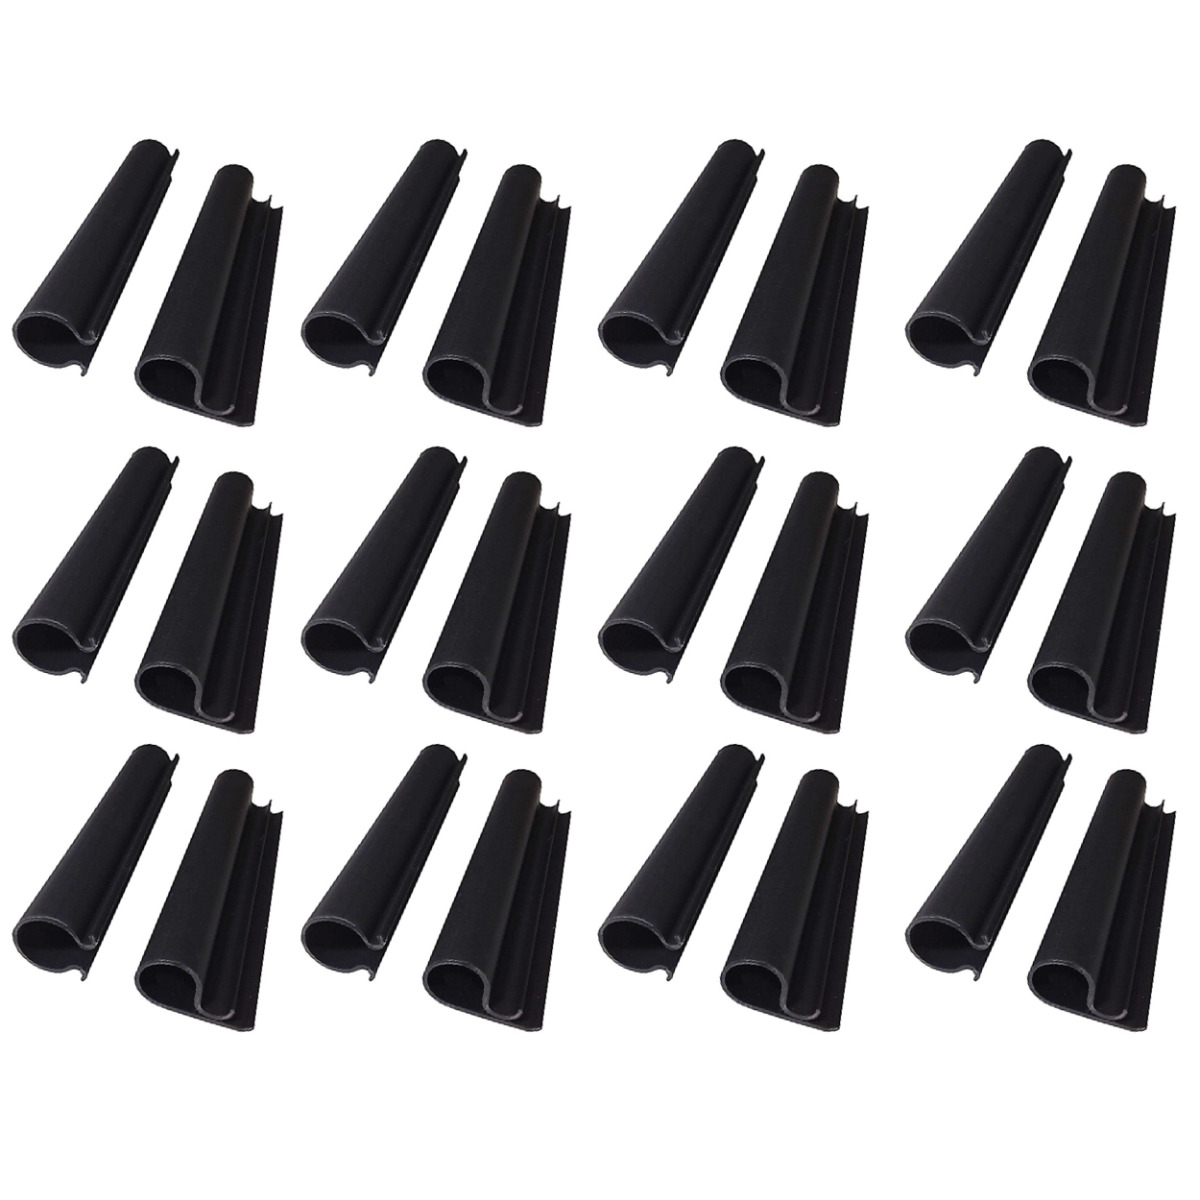 Gladon Company Two Part Cover Loc Clips - 5, Bag of 12